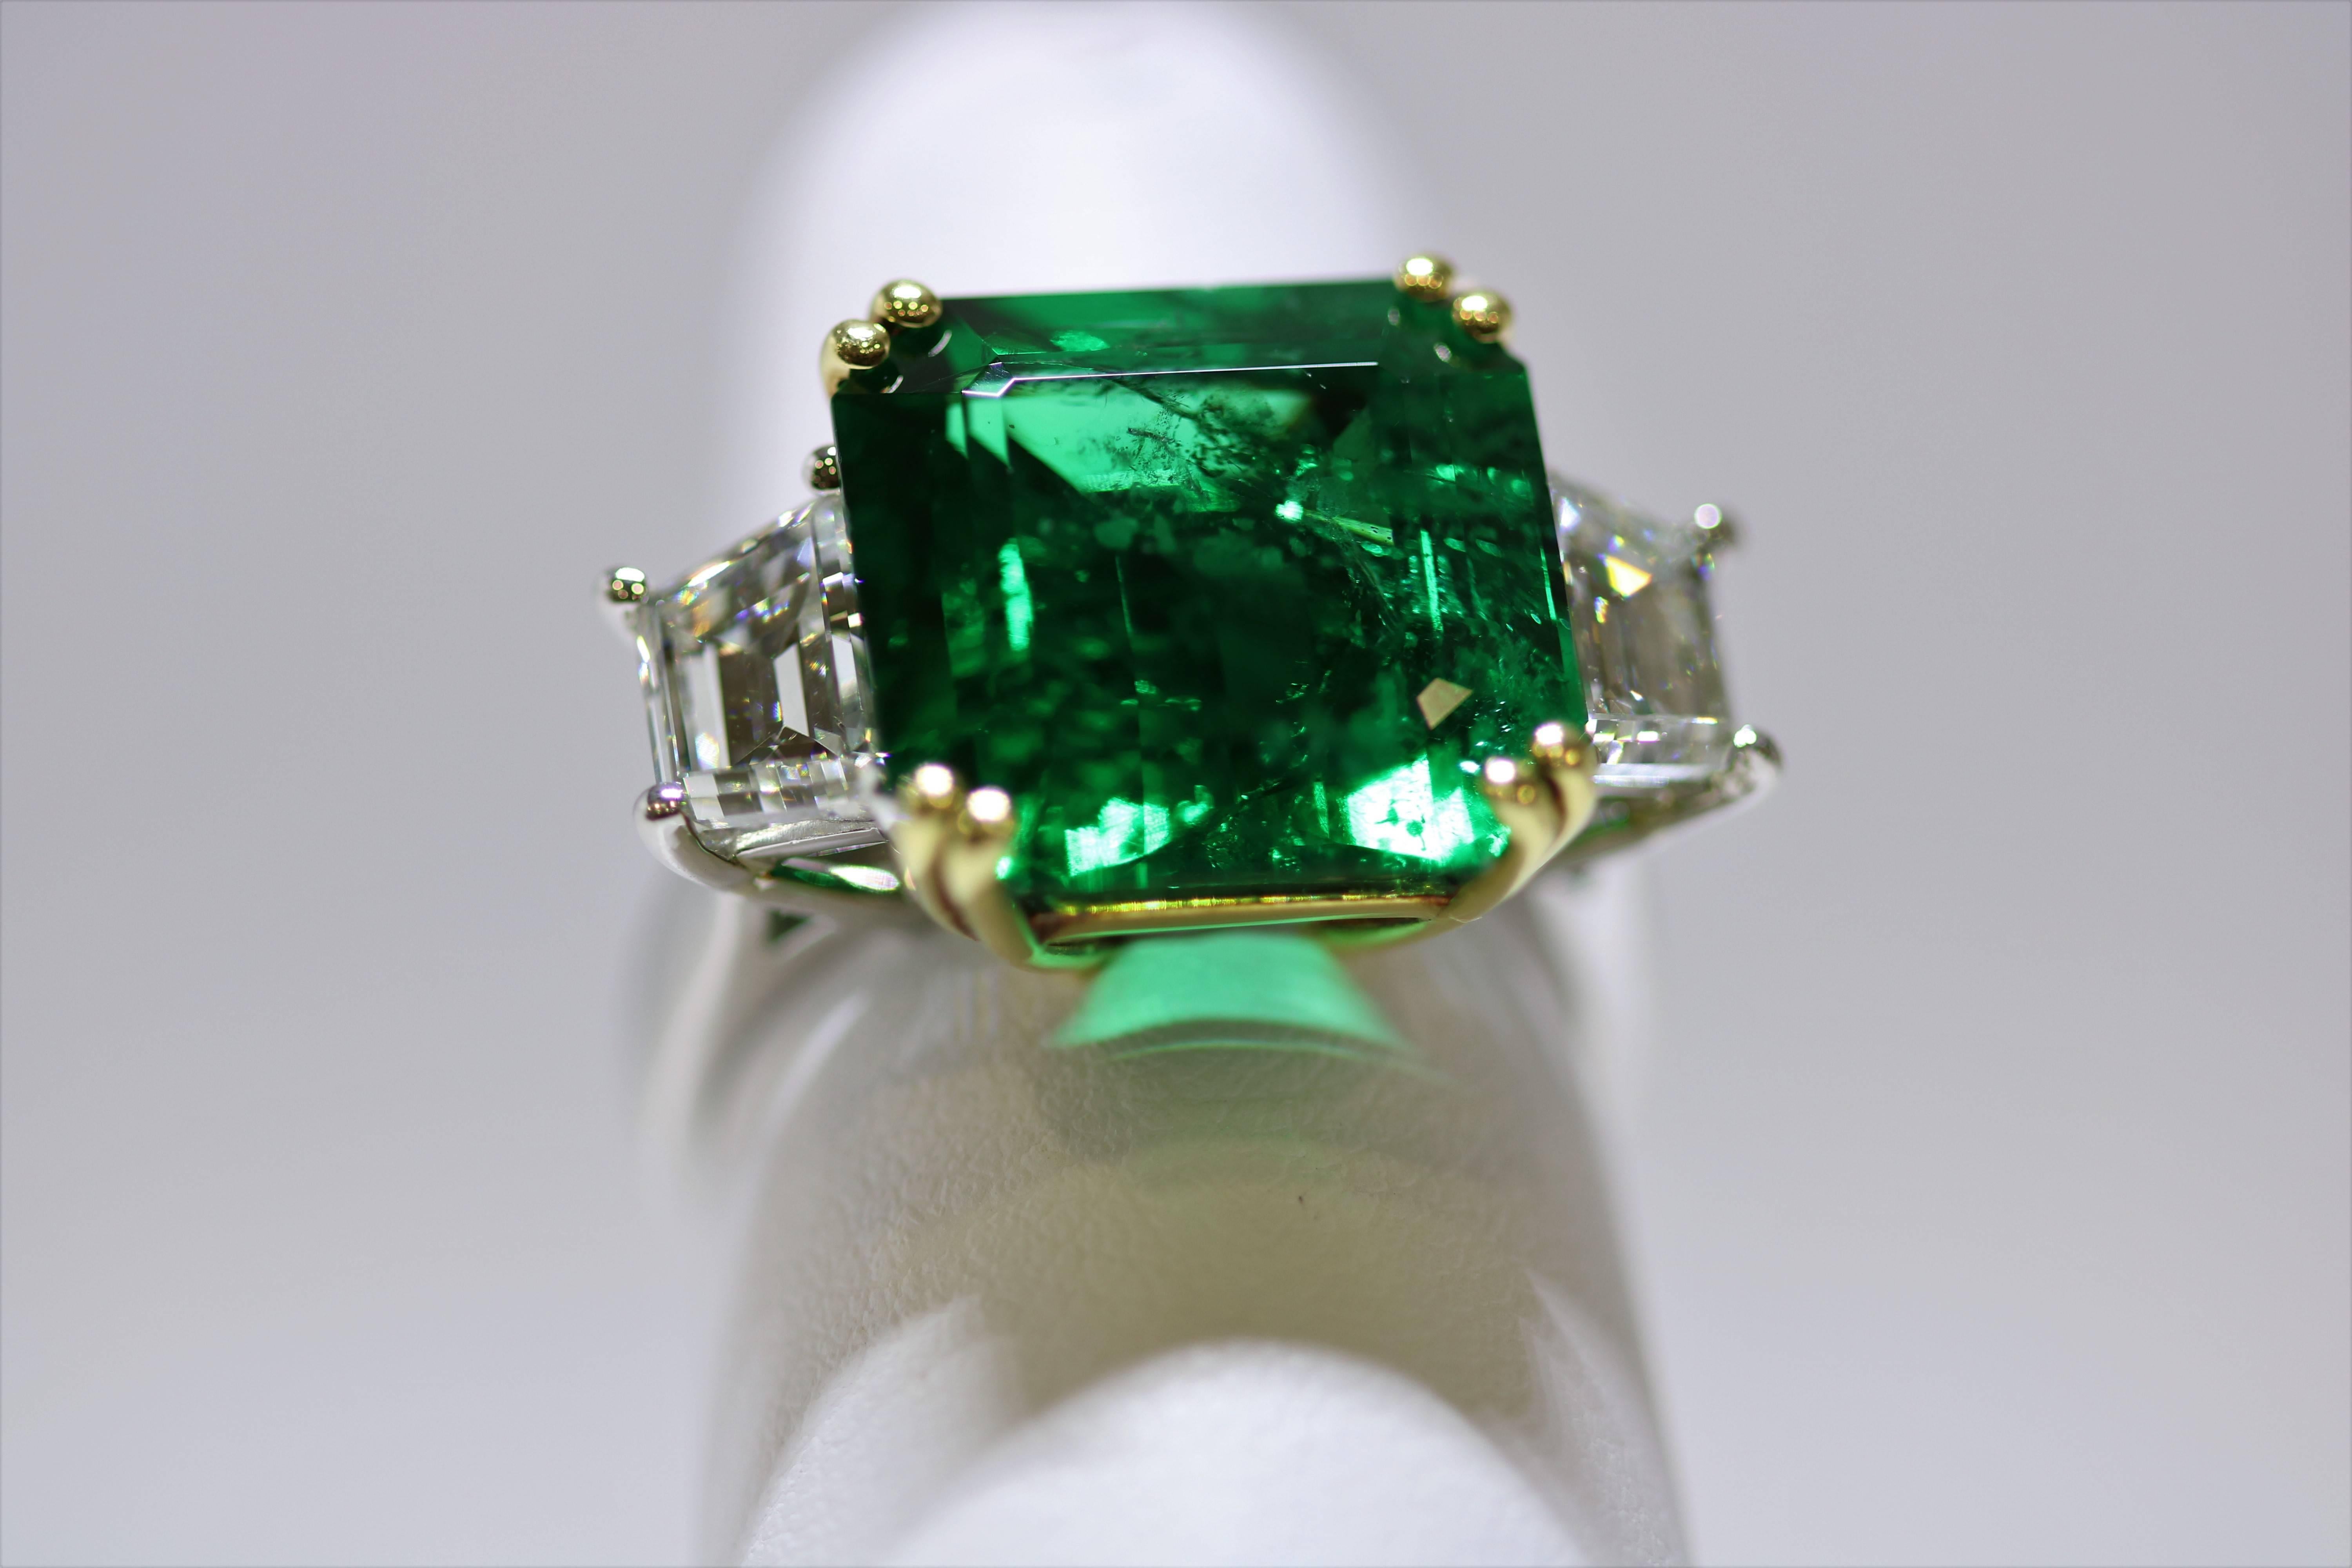 This very fine emerald and strikingly beautiful diamond ring features a 9.02 ct   square Emerald stone with 2 fine trapezoid diamonds, 2.21 ct total weight; Emerald is Zambias, extremely fine and intense green color, excellent brilliance in an 18k